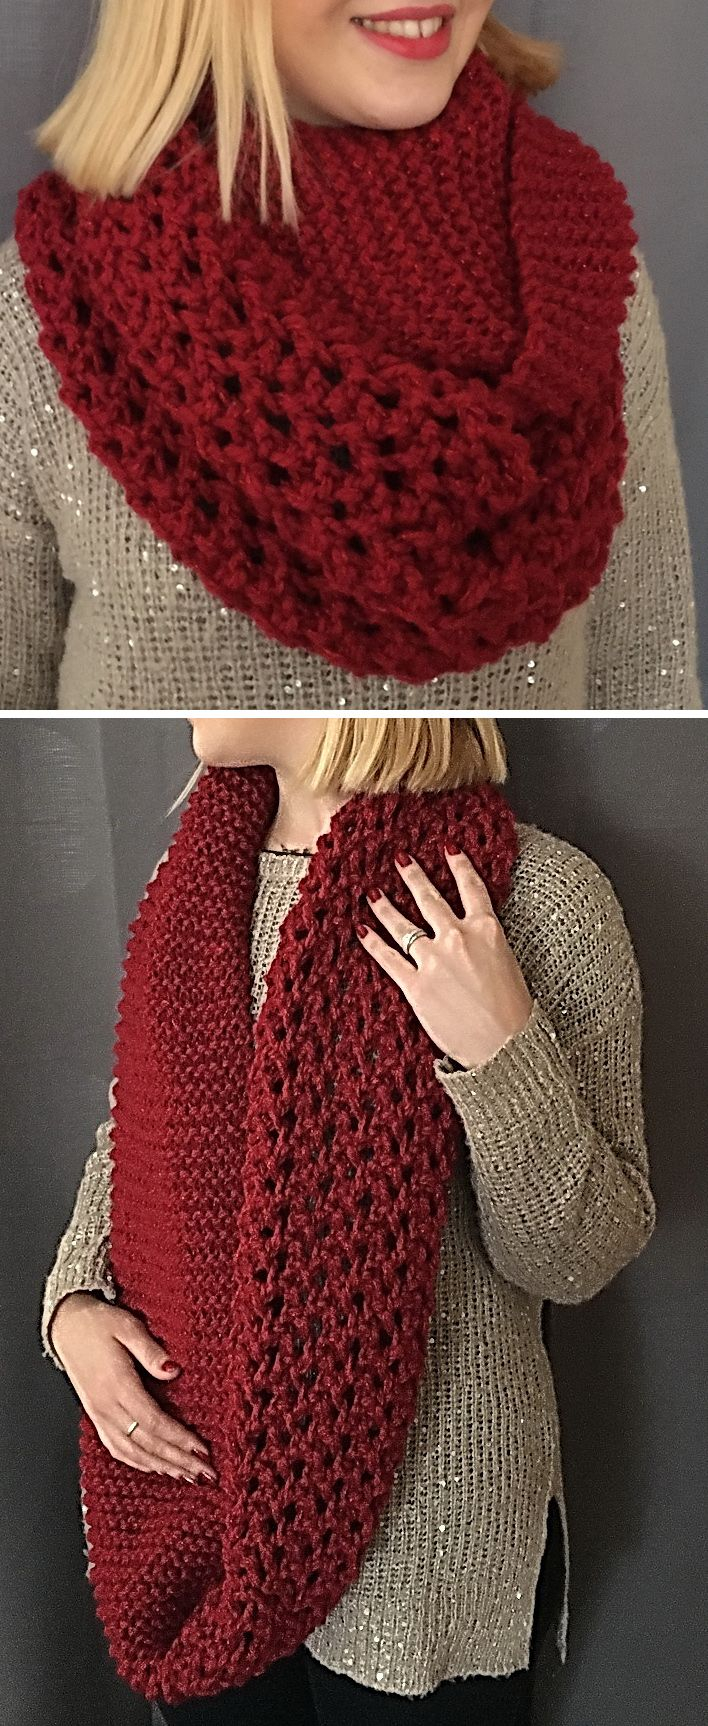 Snood Scarf Crochet Pattern Free Until Jan 7 2017 Only Knitting Pattern For Lily Red Snood